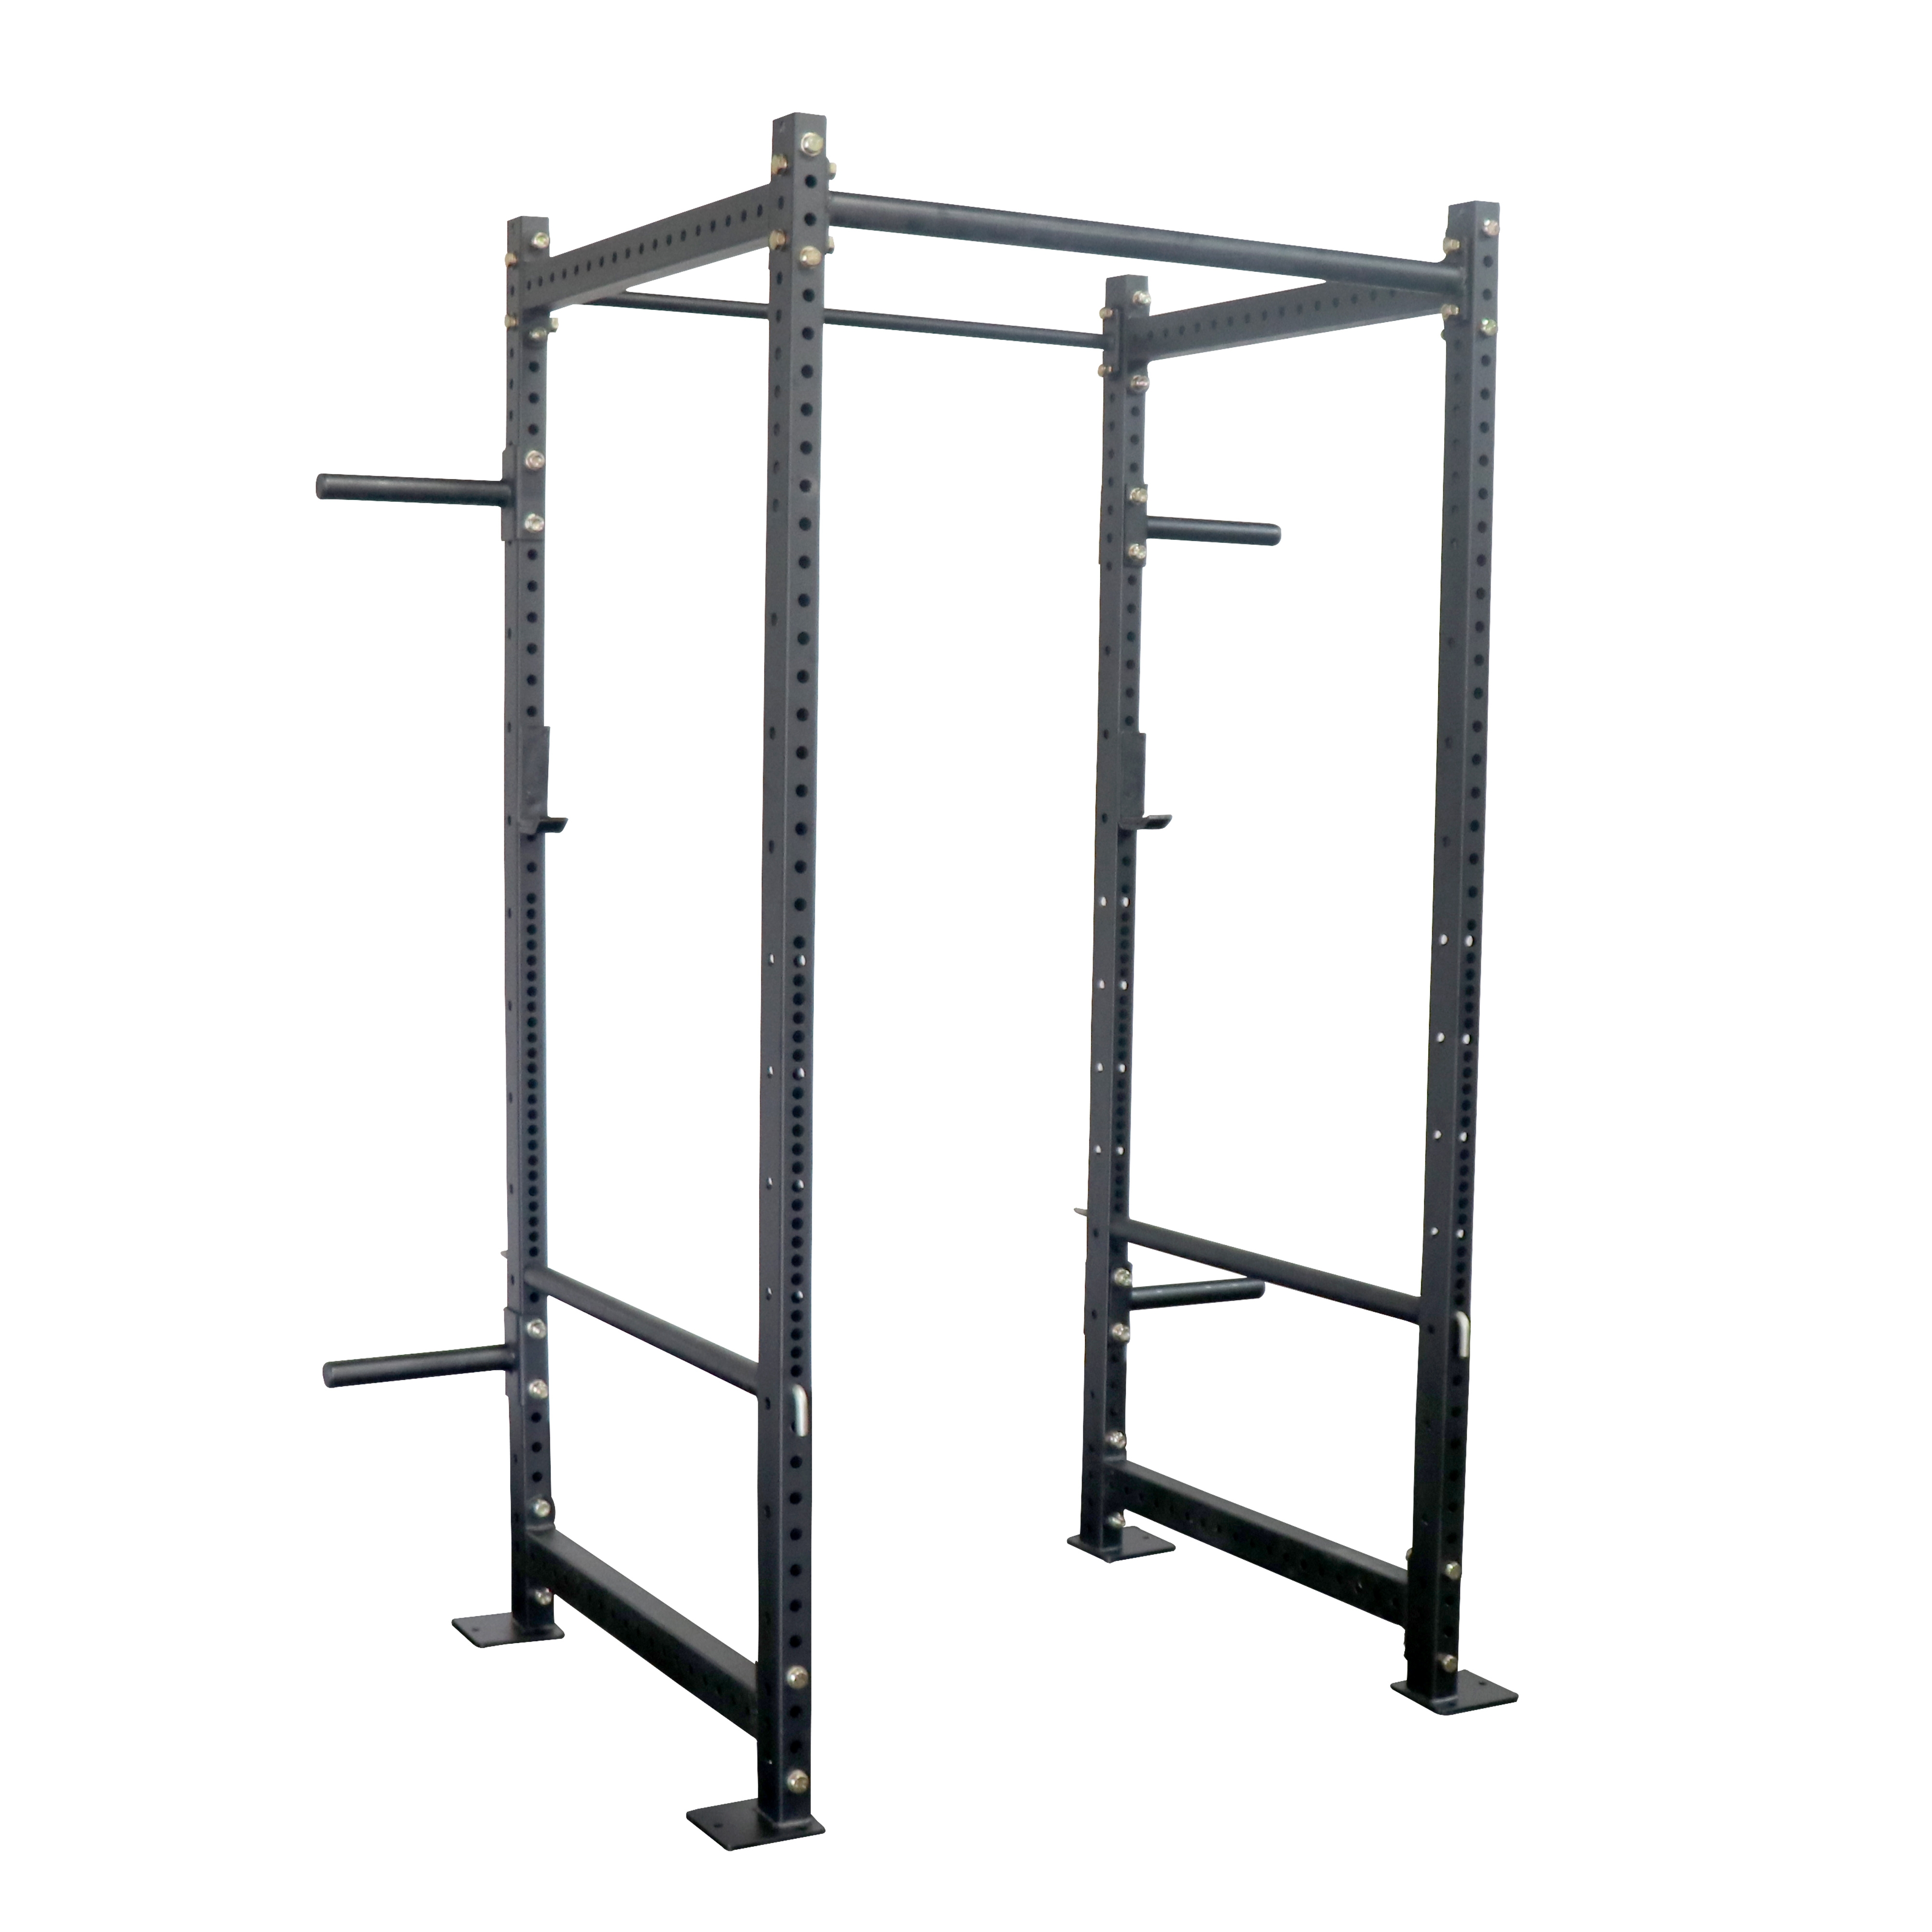 Titan Fitness T-3 Tall Power Rack 36" Depth with Safety Bars and J Hooks - image 1 of 6